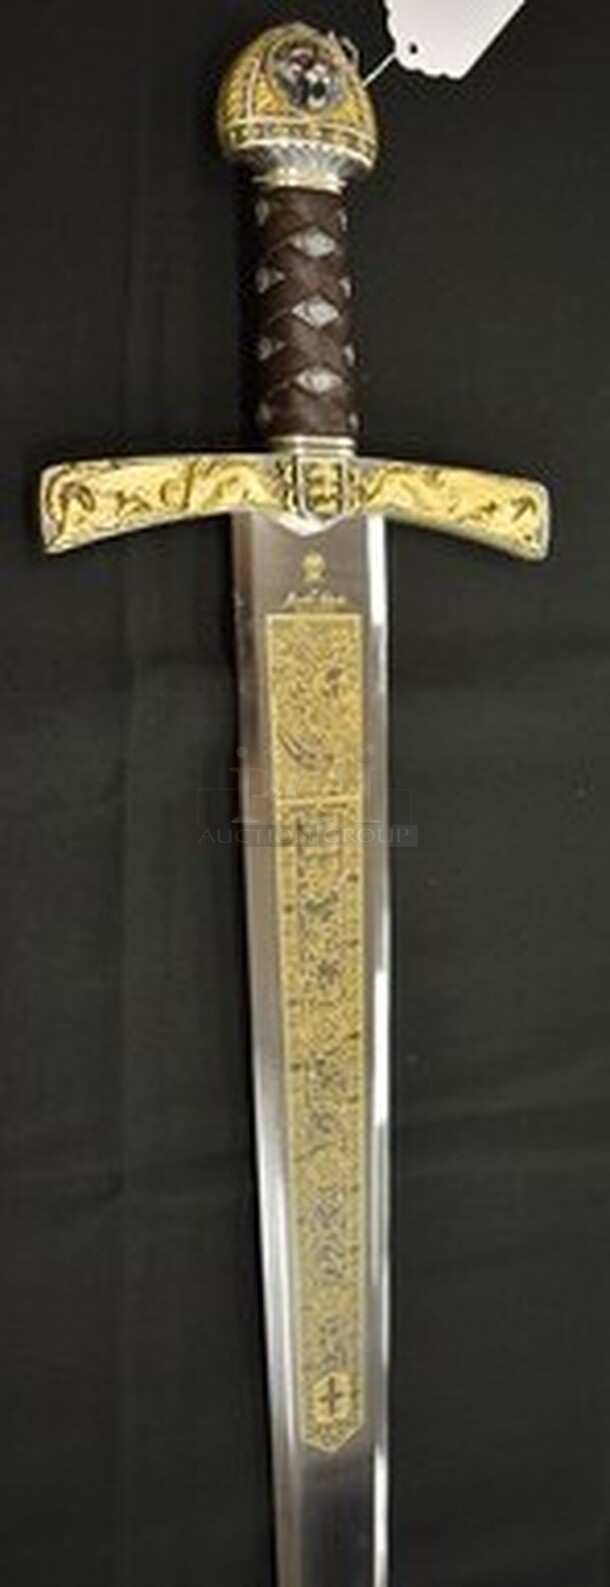 BREATHTAKING! Sword of King Richard Lionheart by Marto Toledo With Stainless Steel Blade with Engravings In 24K Gold! 38x1x8